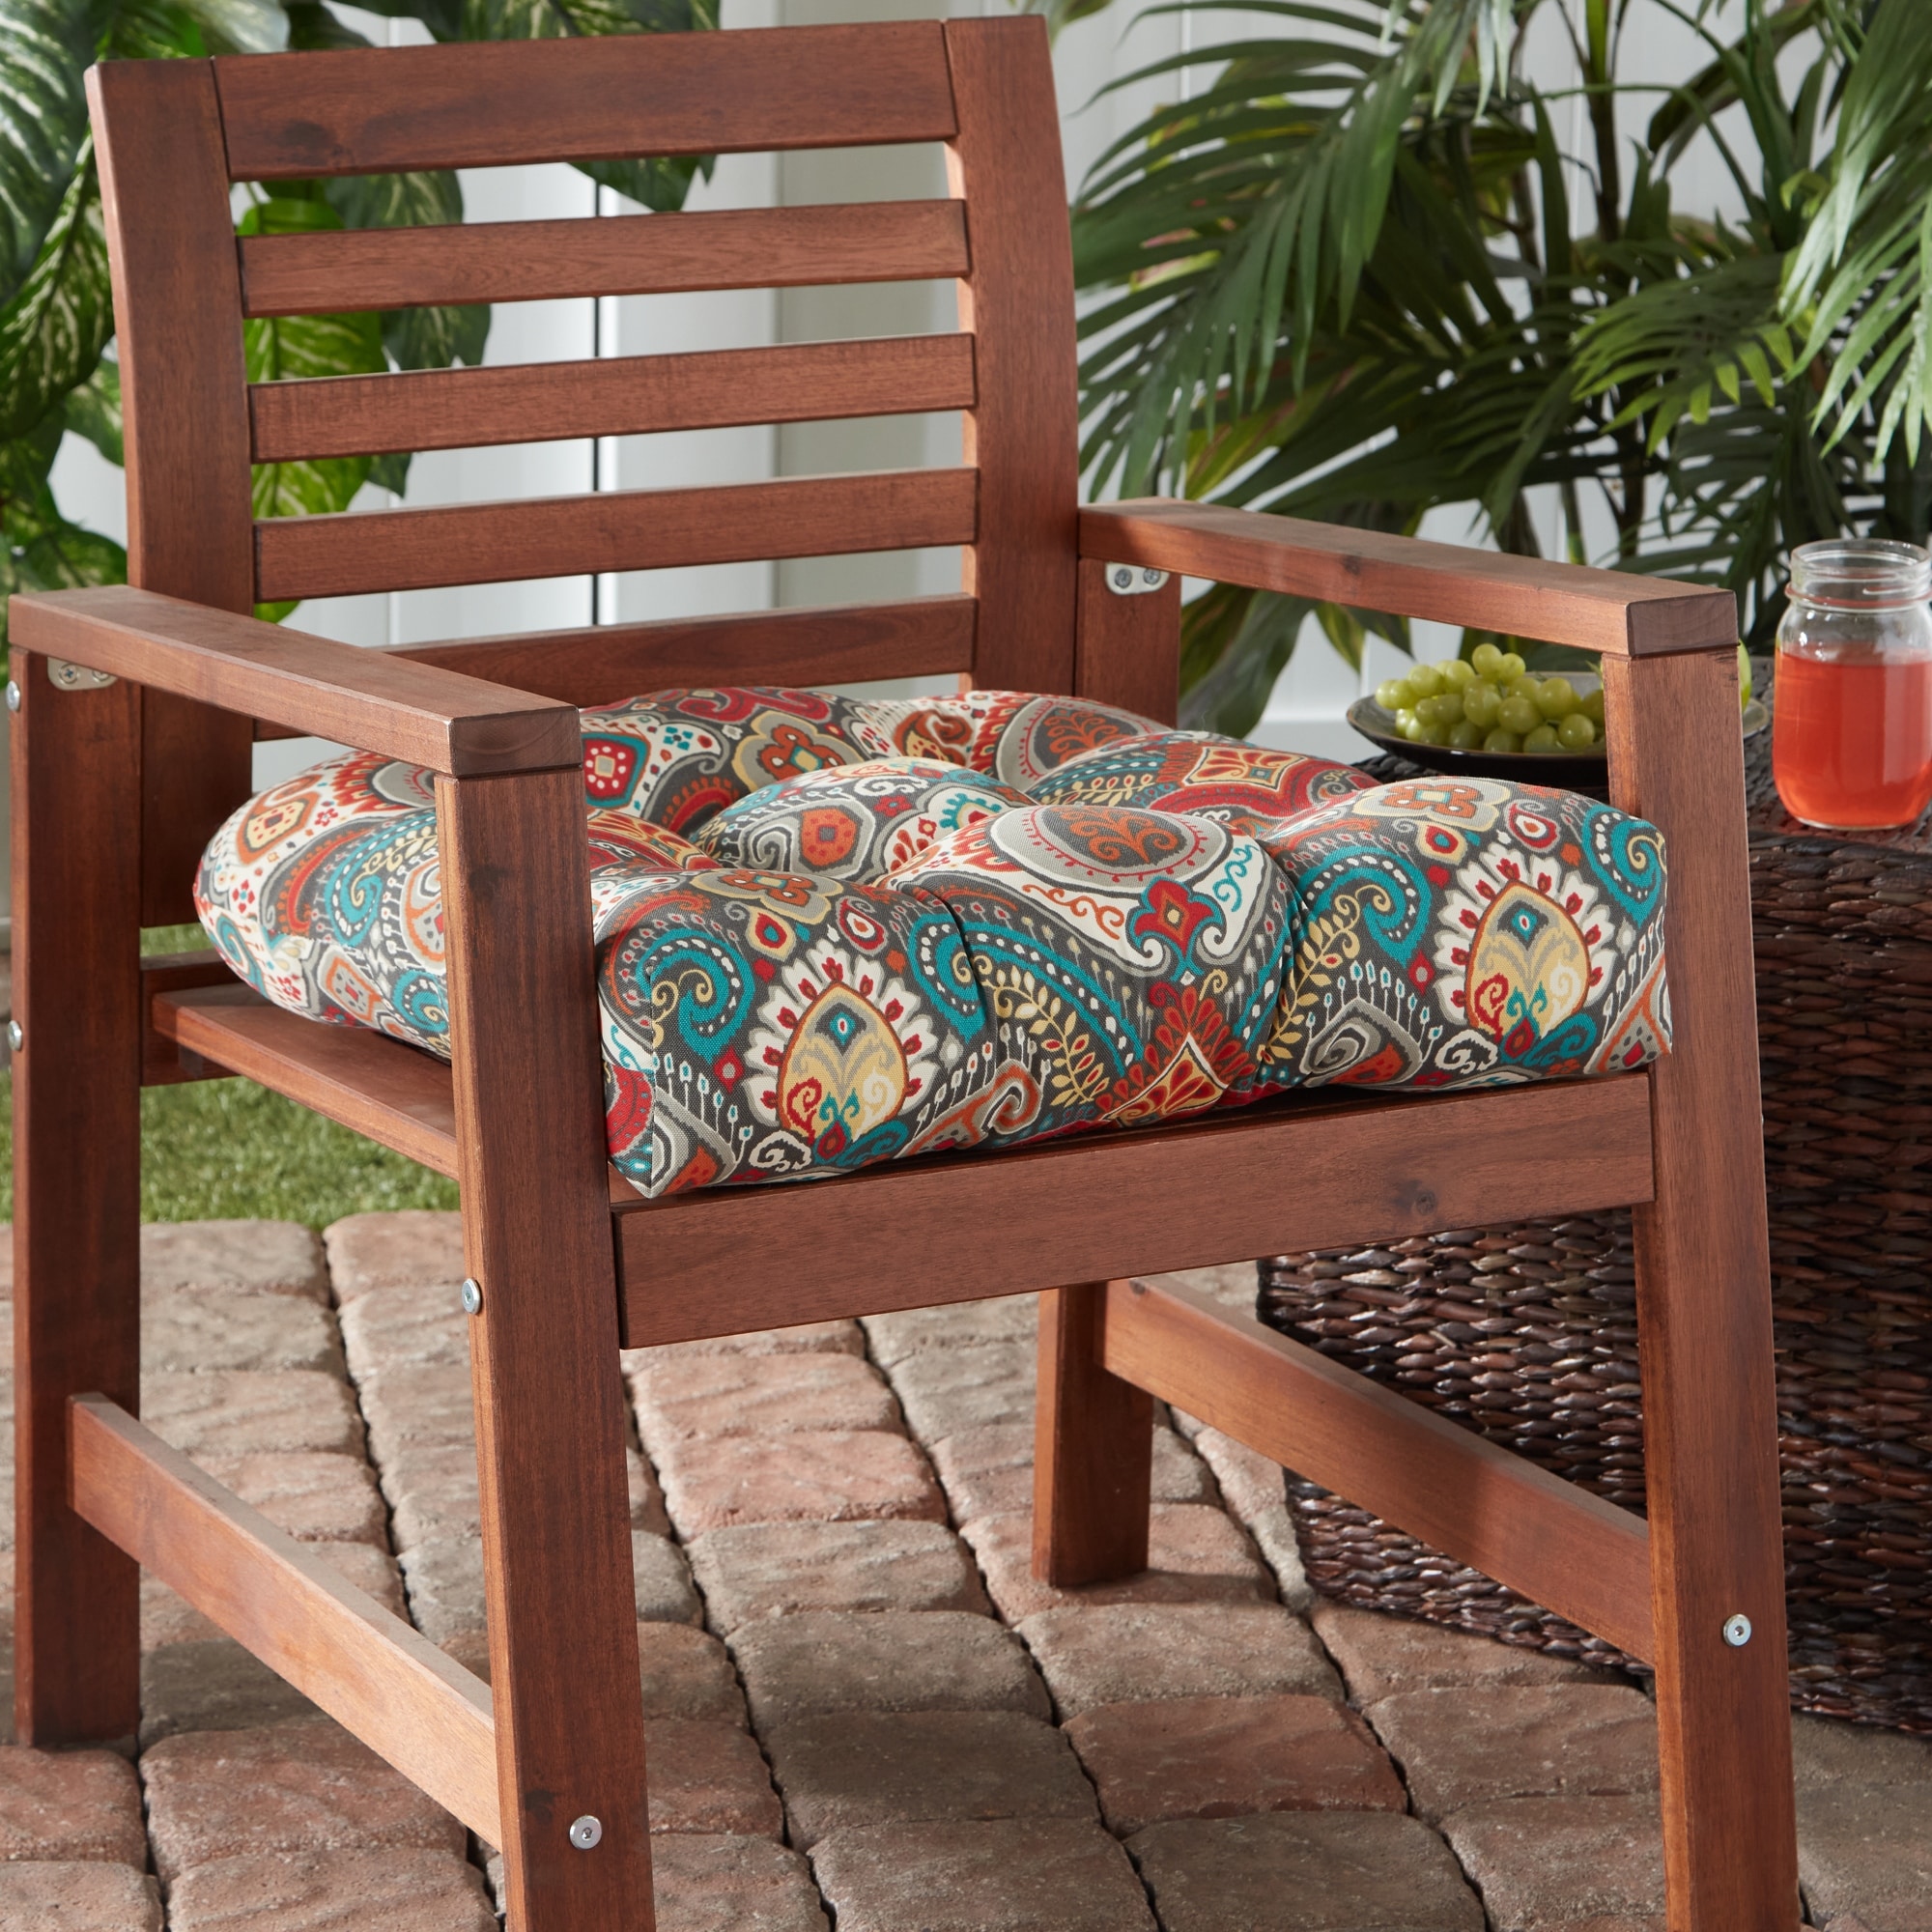 Greendale Home Fashions 21 in. x 42 in. Outdoor Dining Chair Cushion Sunset Multi-Color Stripe (2-Pack)